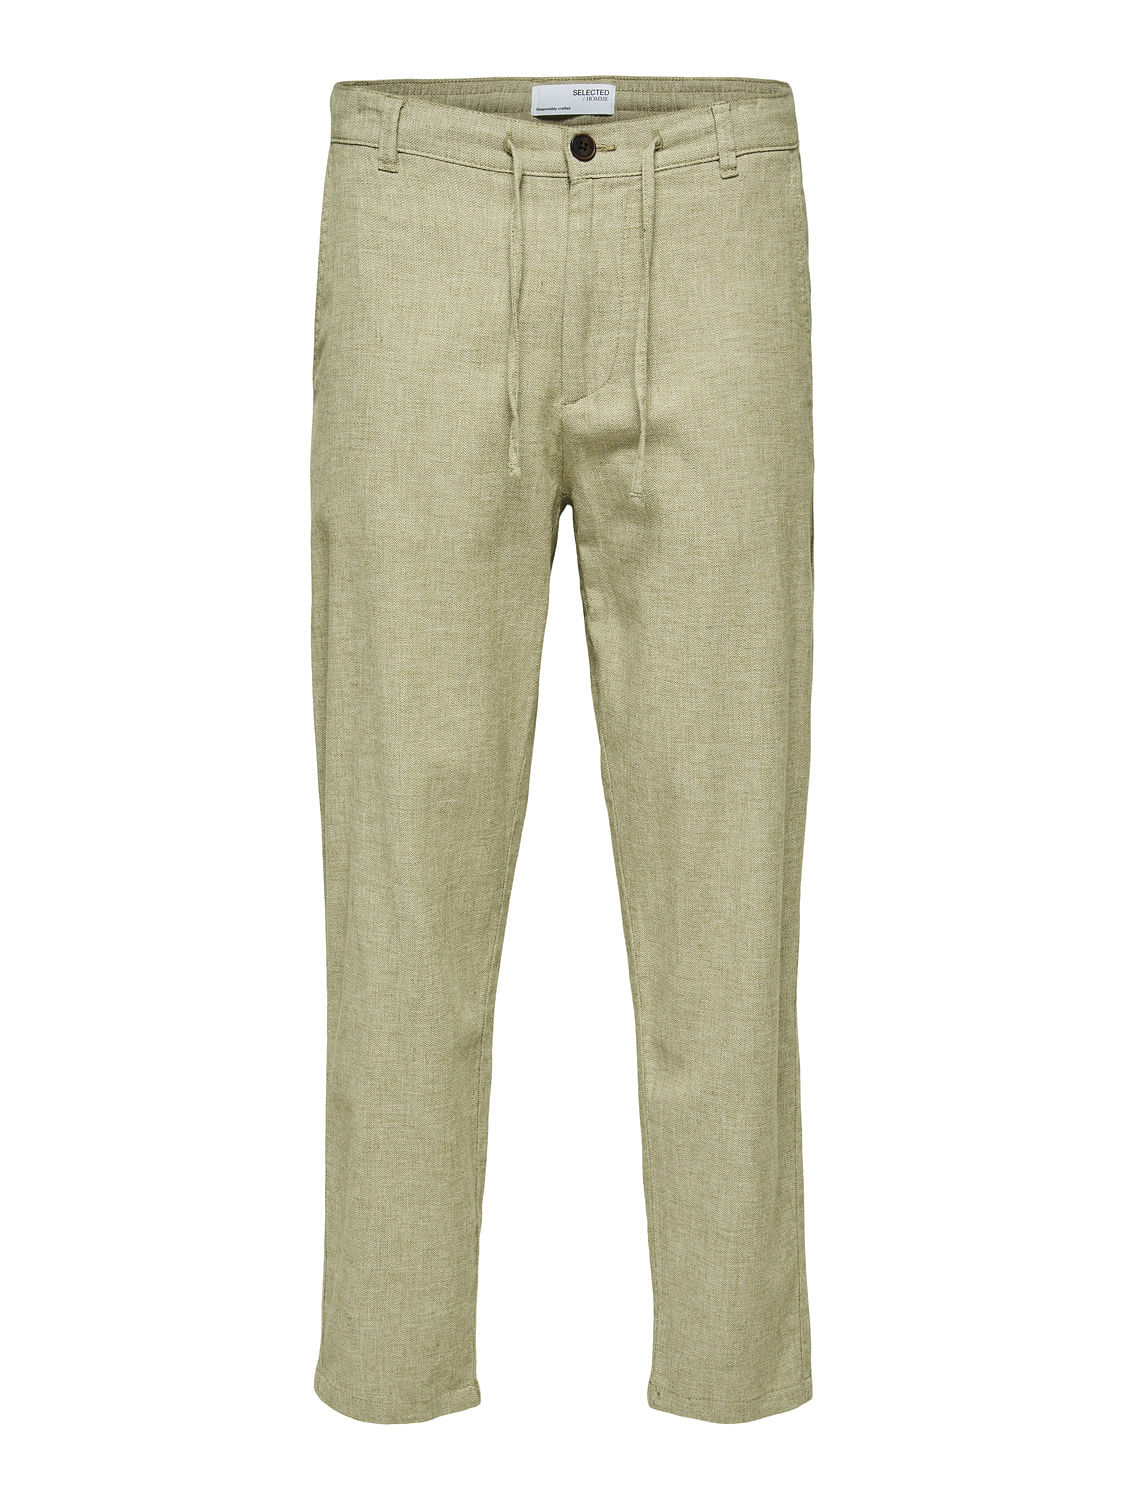 Relaxed fit drawstring trousers - Women's fashion | Stradivarius United  States